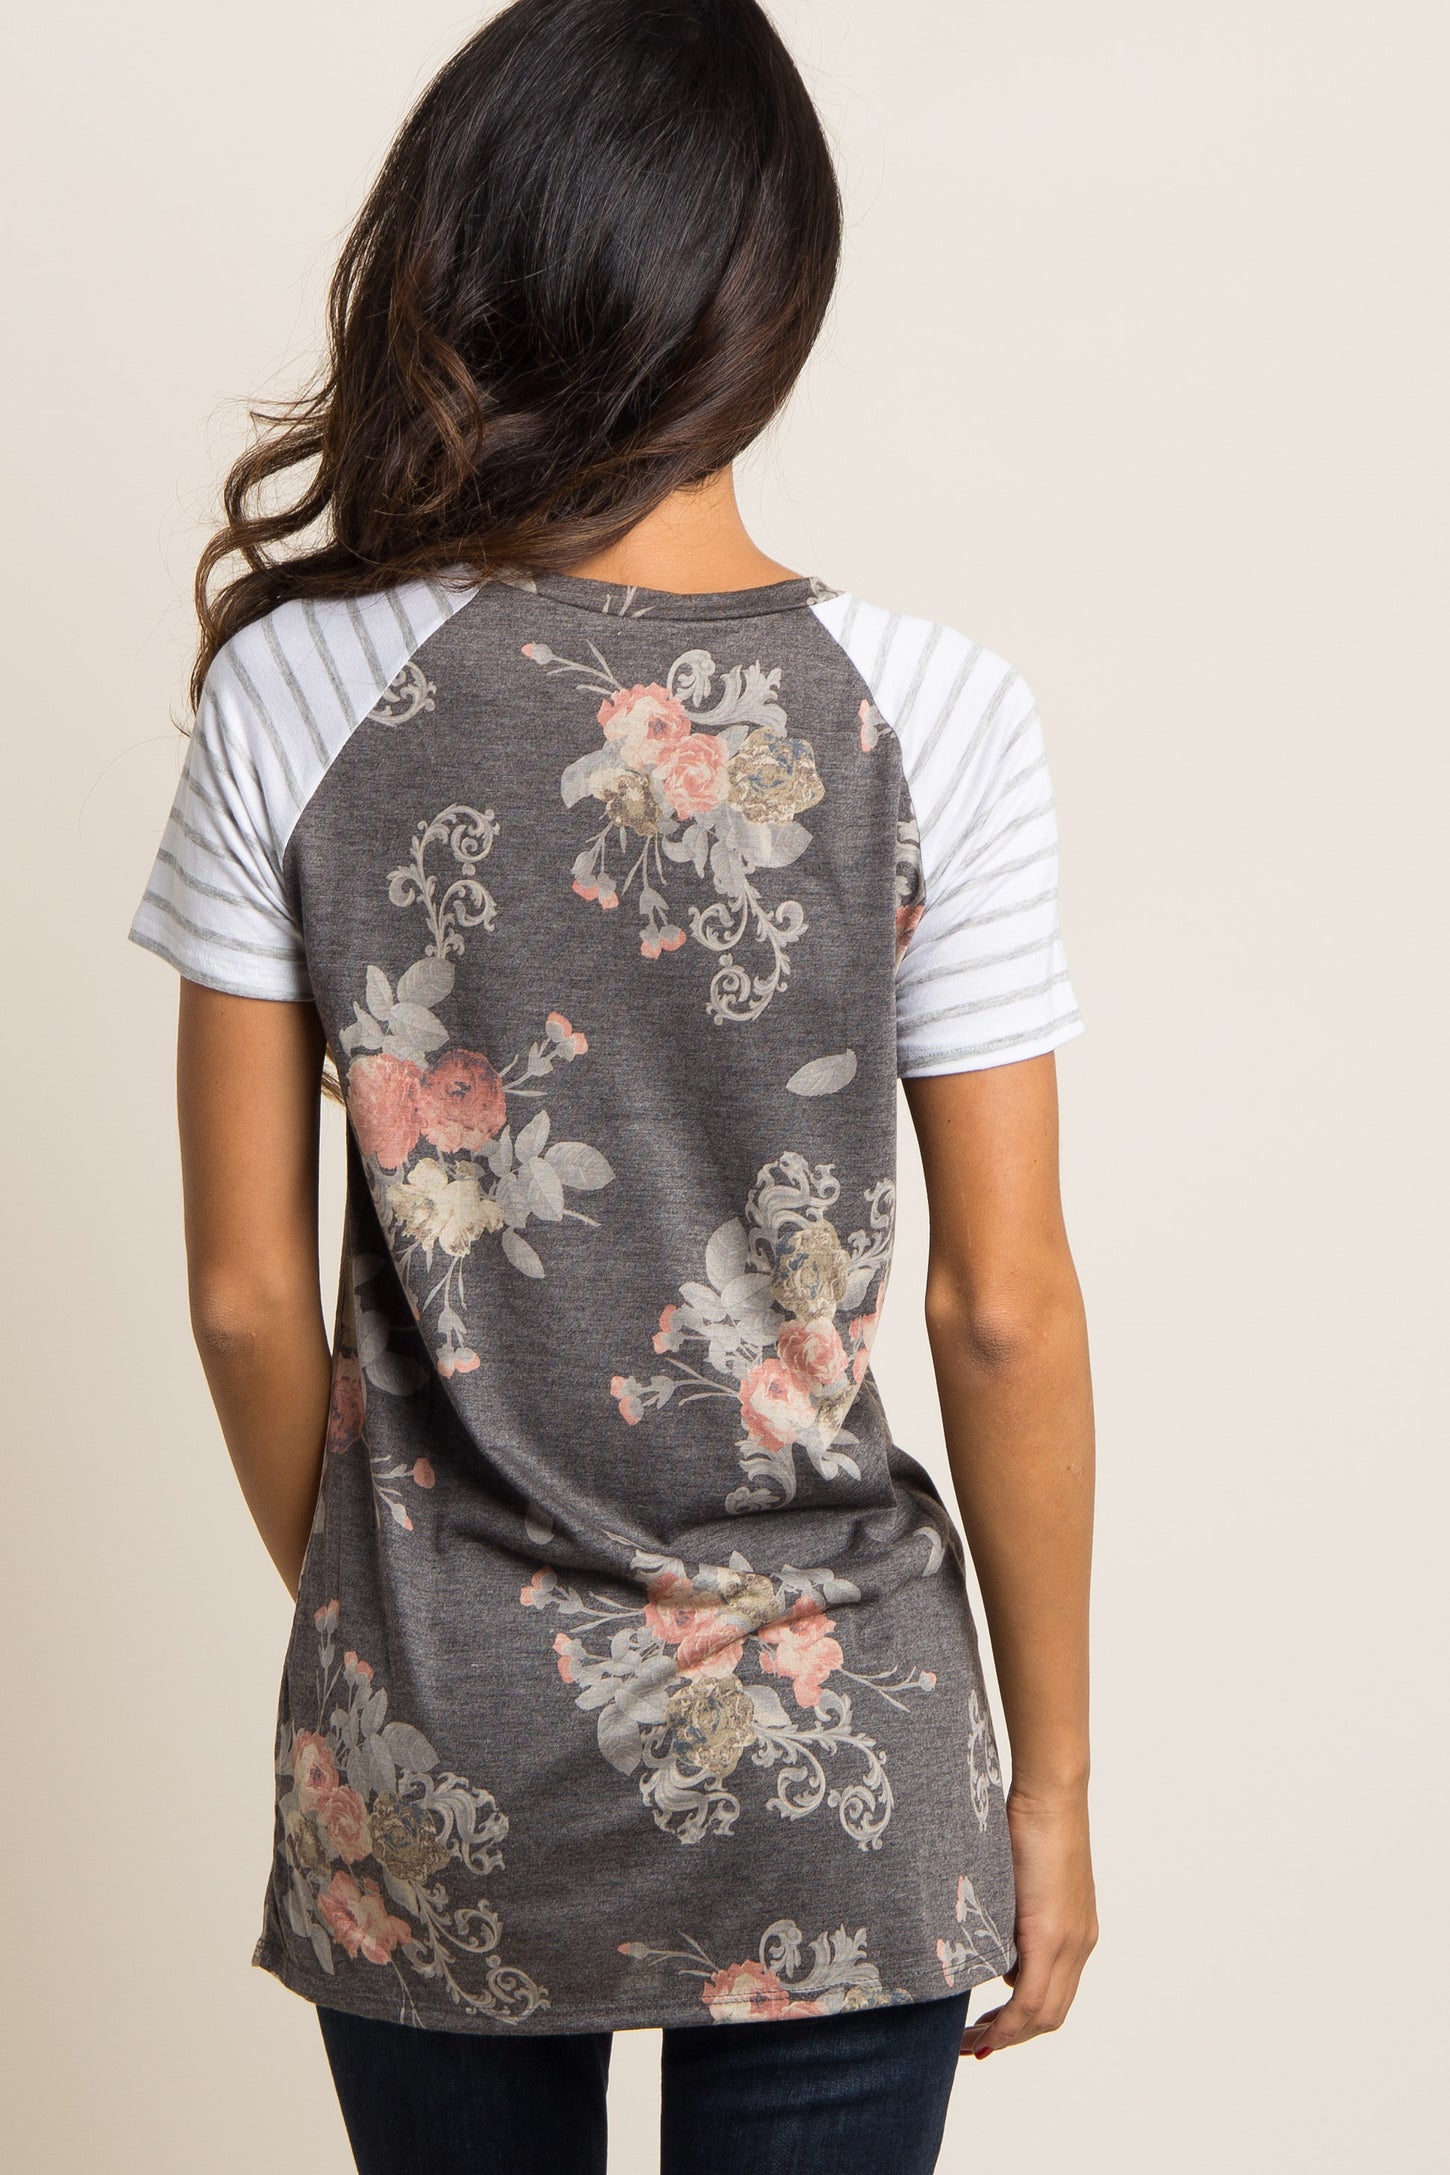 Charcoal Grey Floral Colorblock Striped Sleeve Top